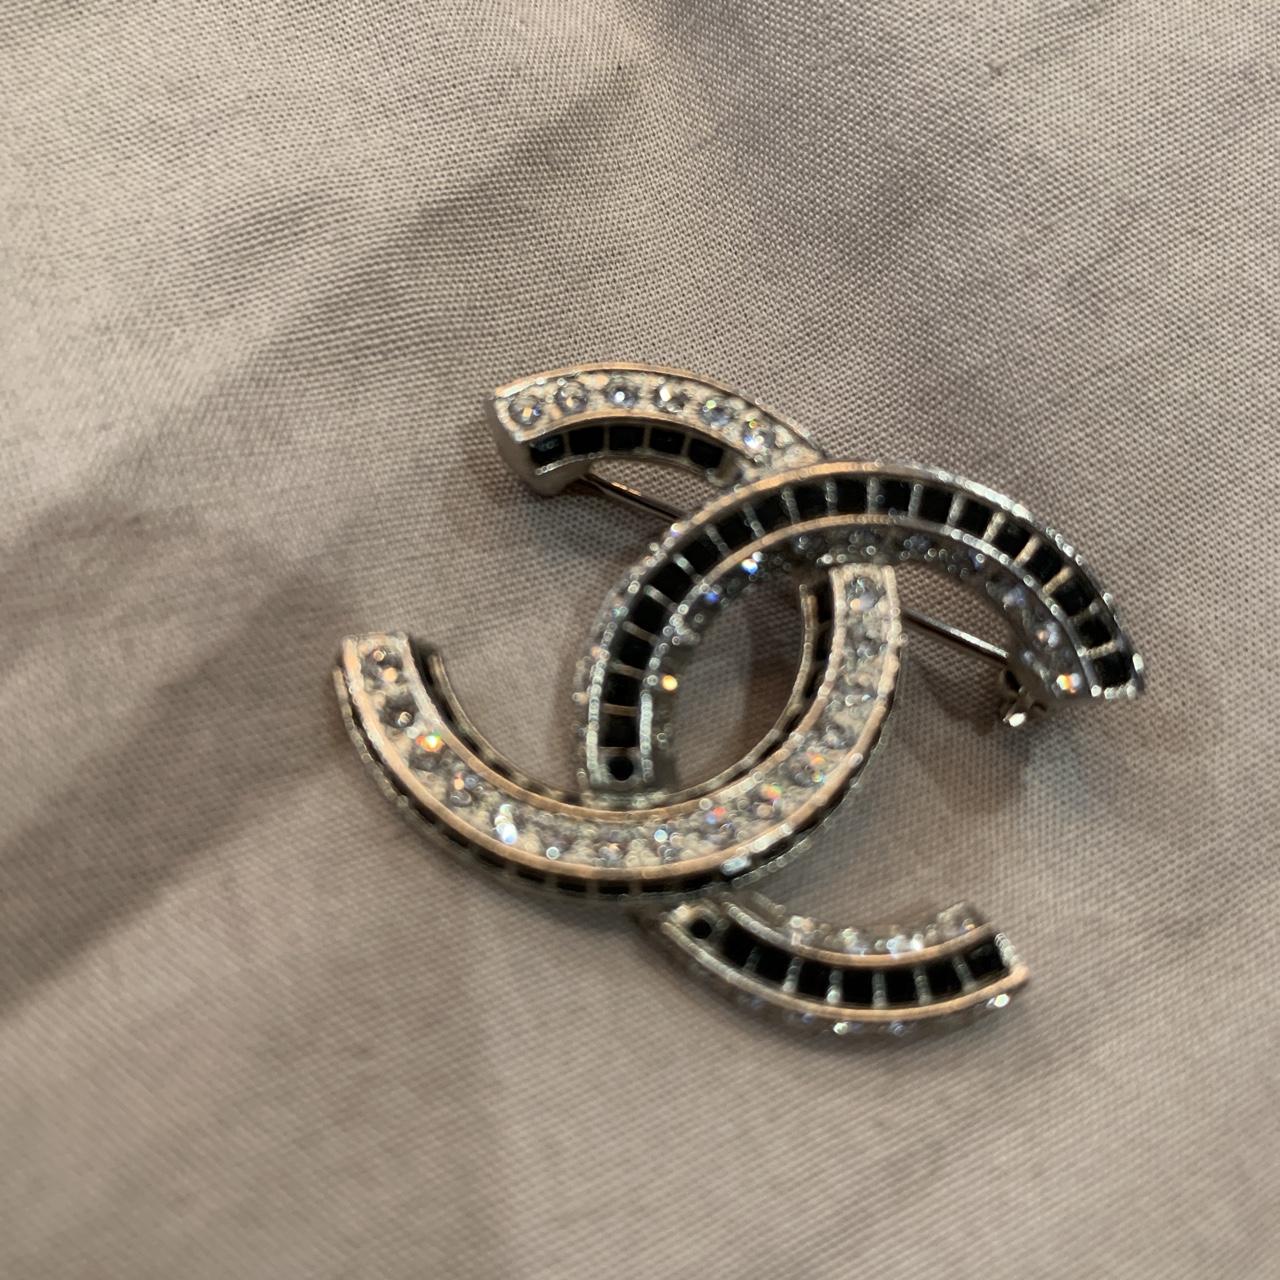 Chanel Brooch .Stunning .All sold out in Chanel